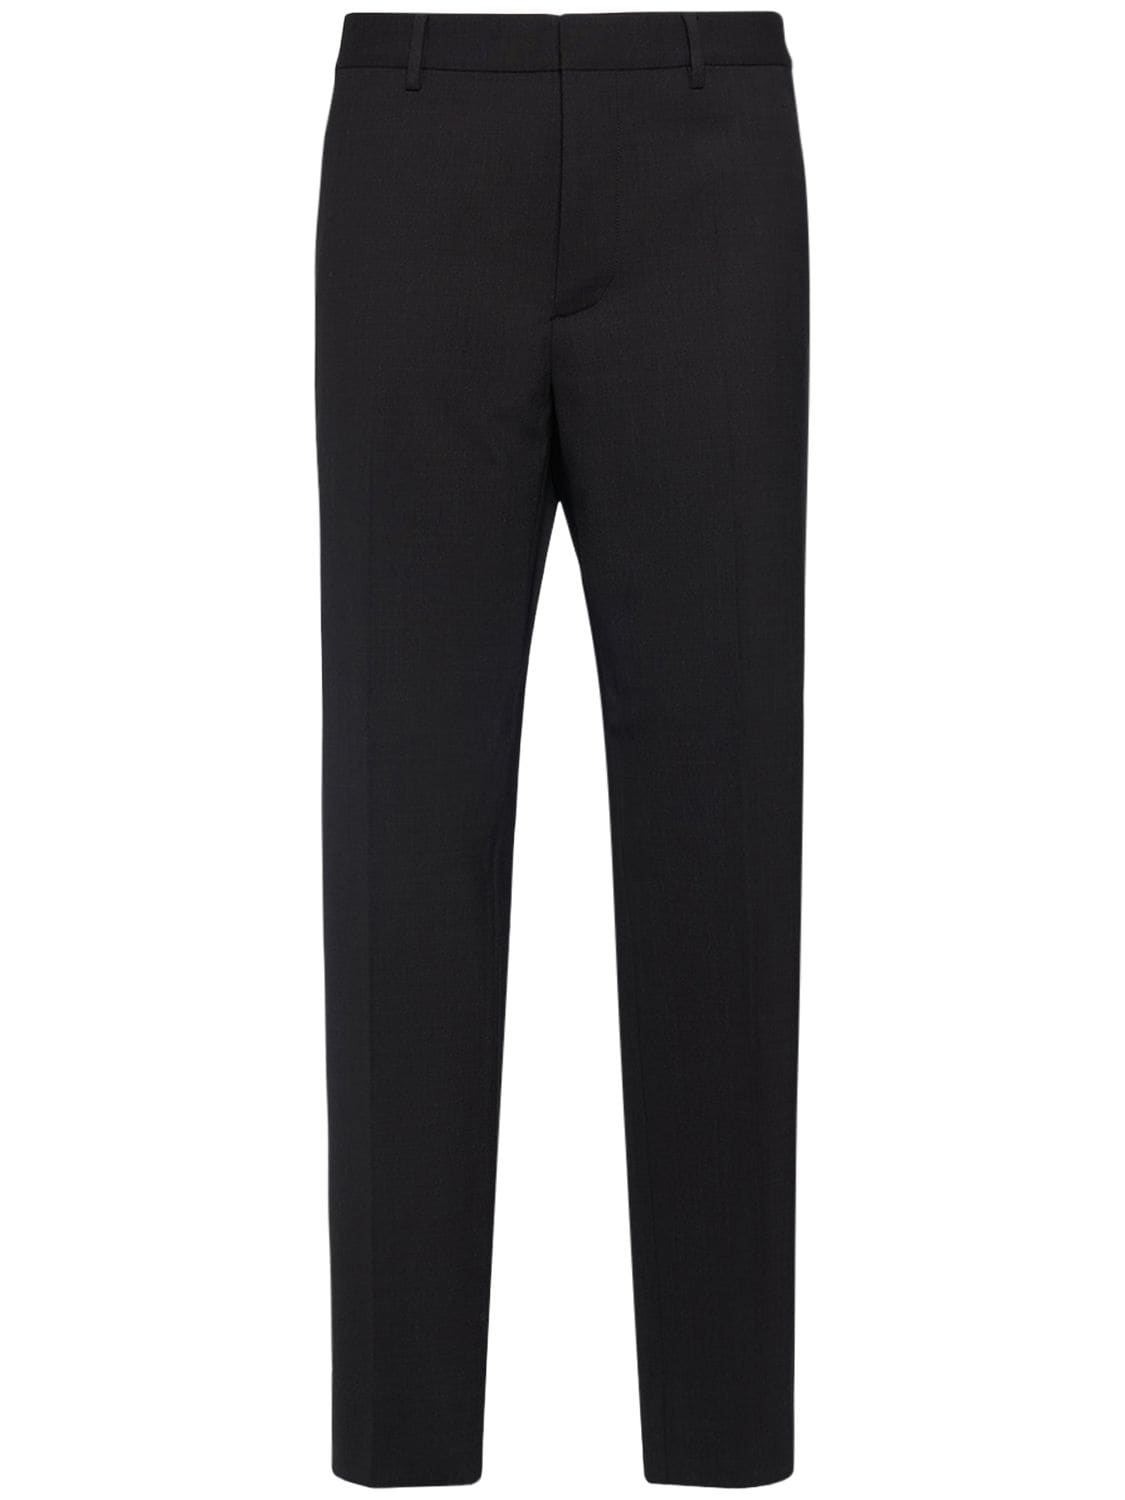 Image of Relaxed Stretch Wool Pants